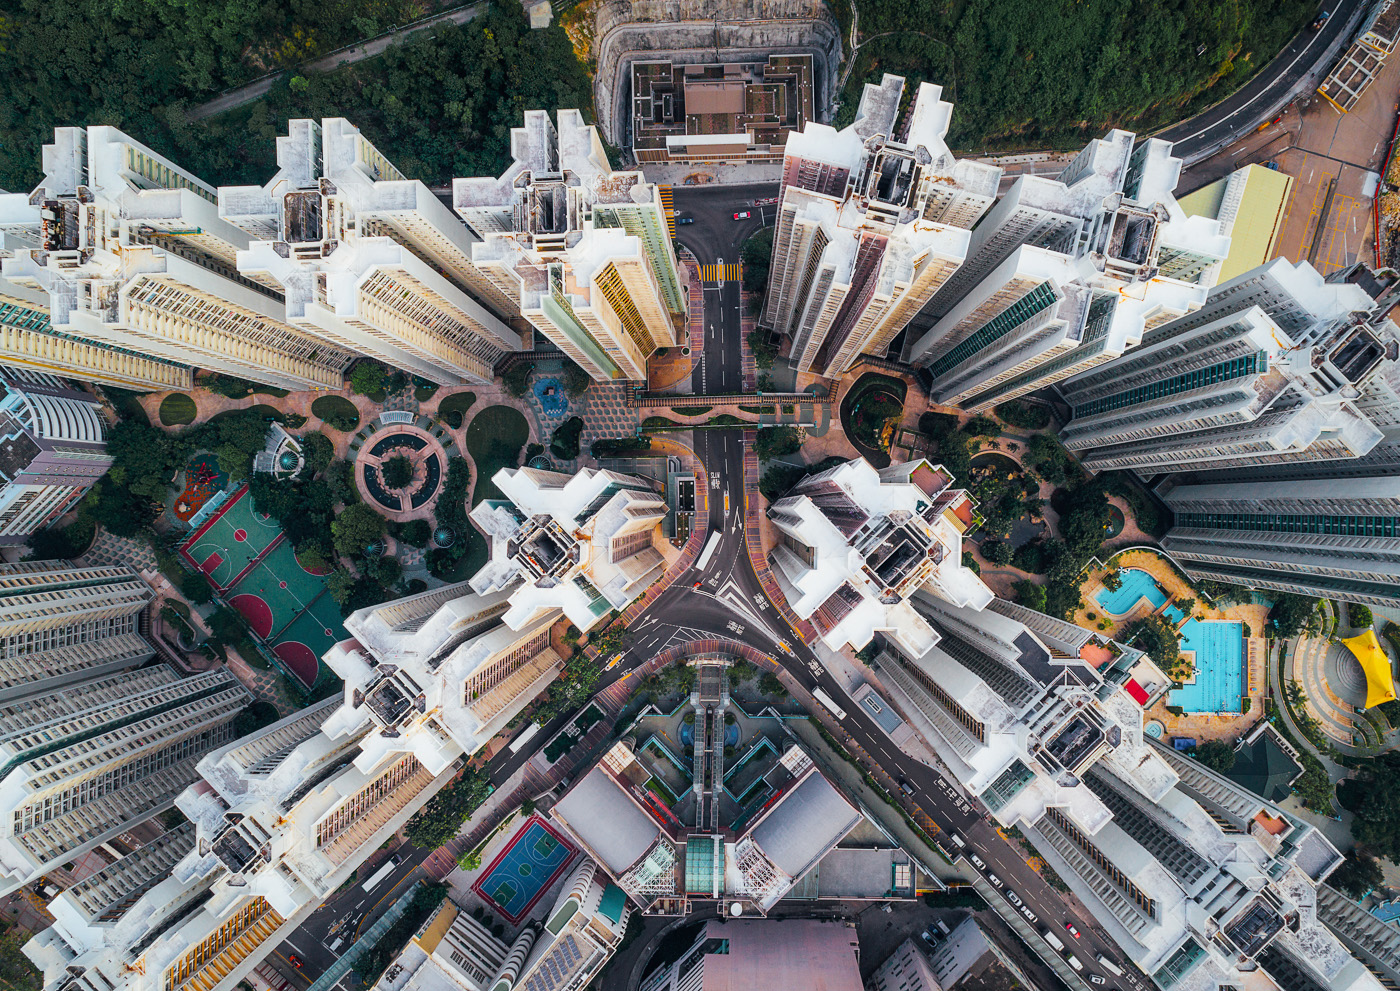 Hong Kong Looks Beautifully Uncanny When Seen From The Sky